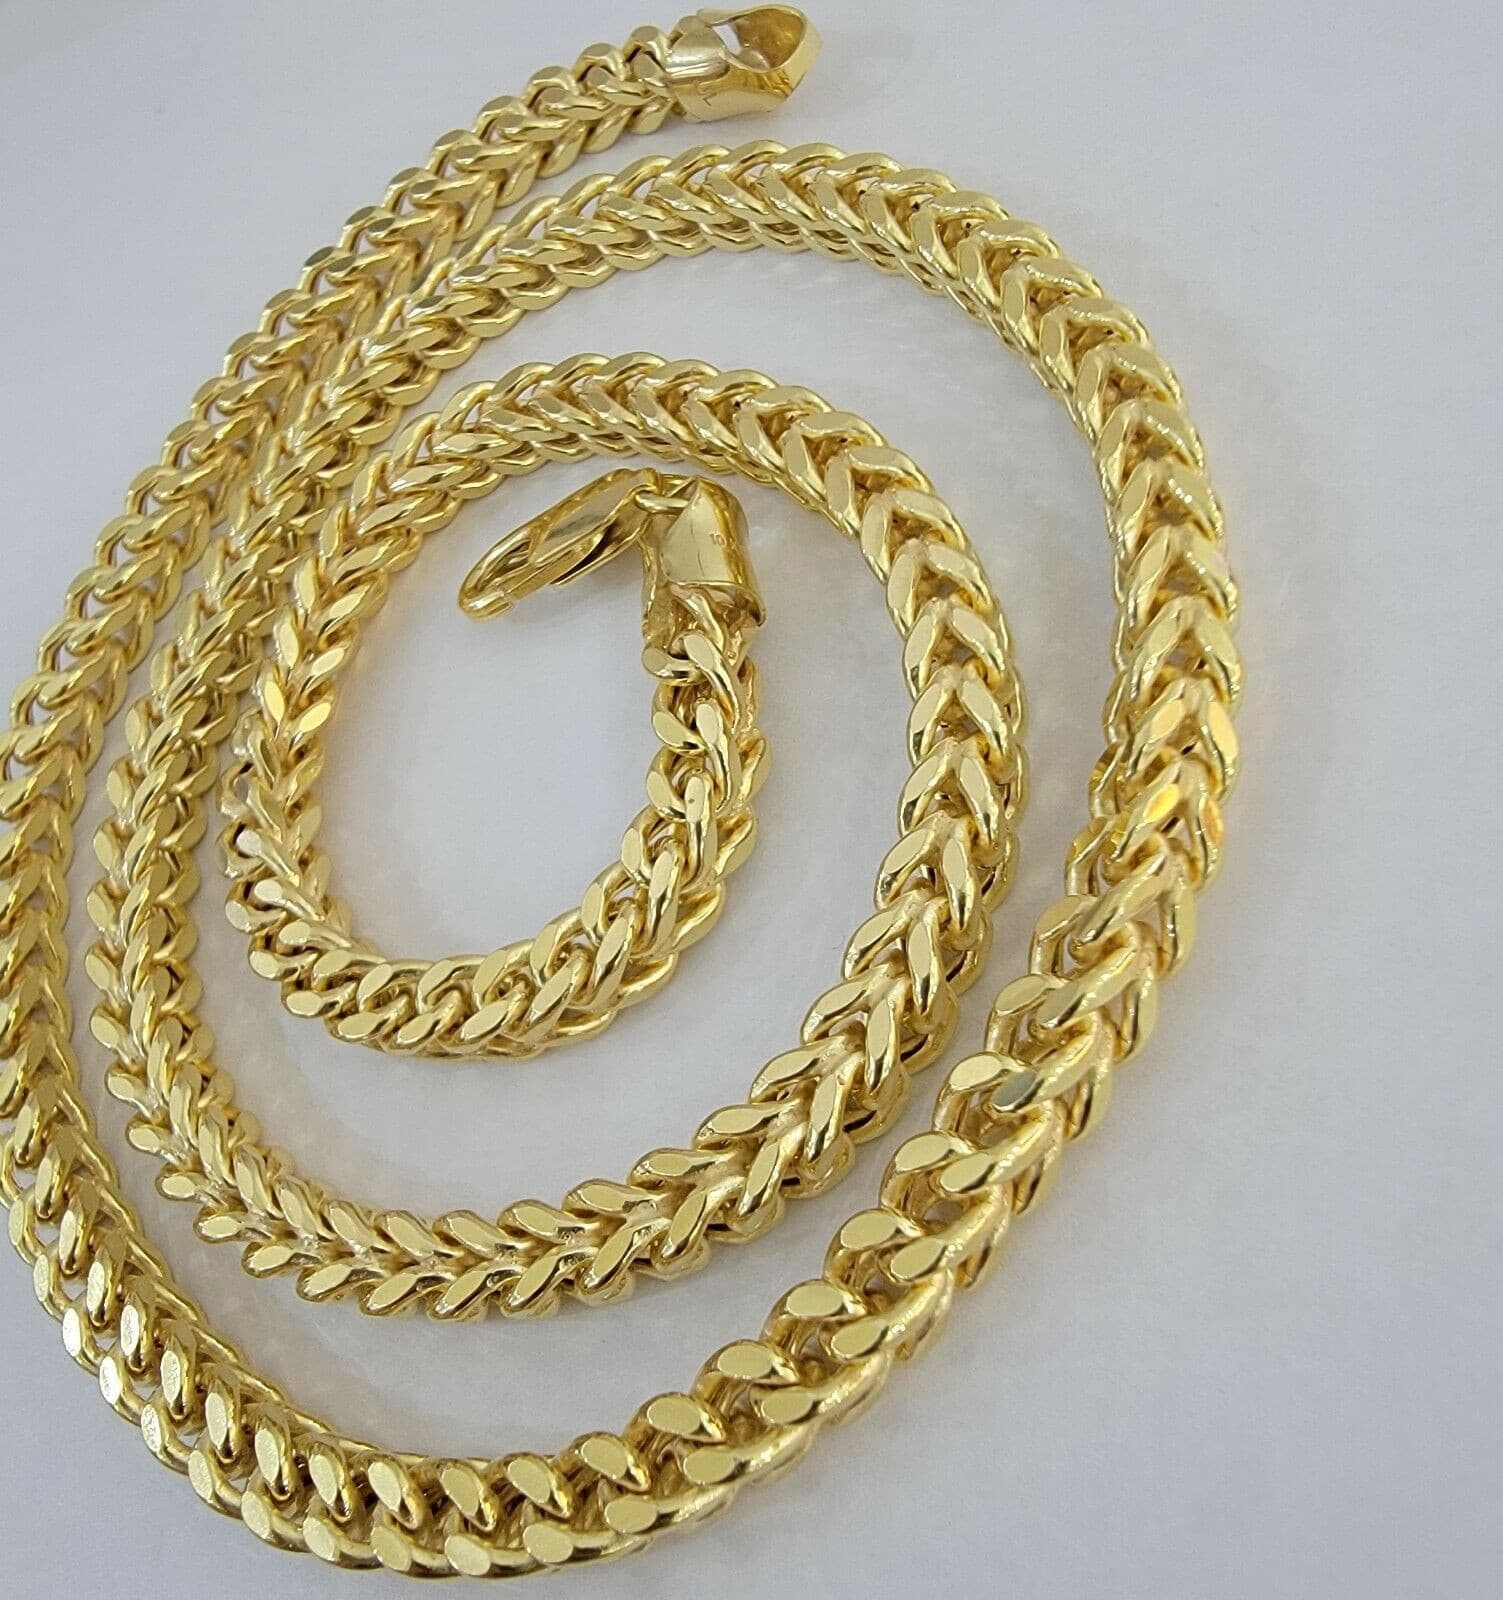 Real 10K Gold Franco Chain Men's Necklace 30" Necklace 7mm Thick, 10 KT STRONG